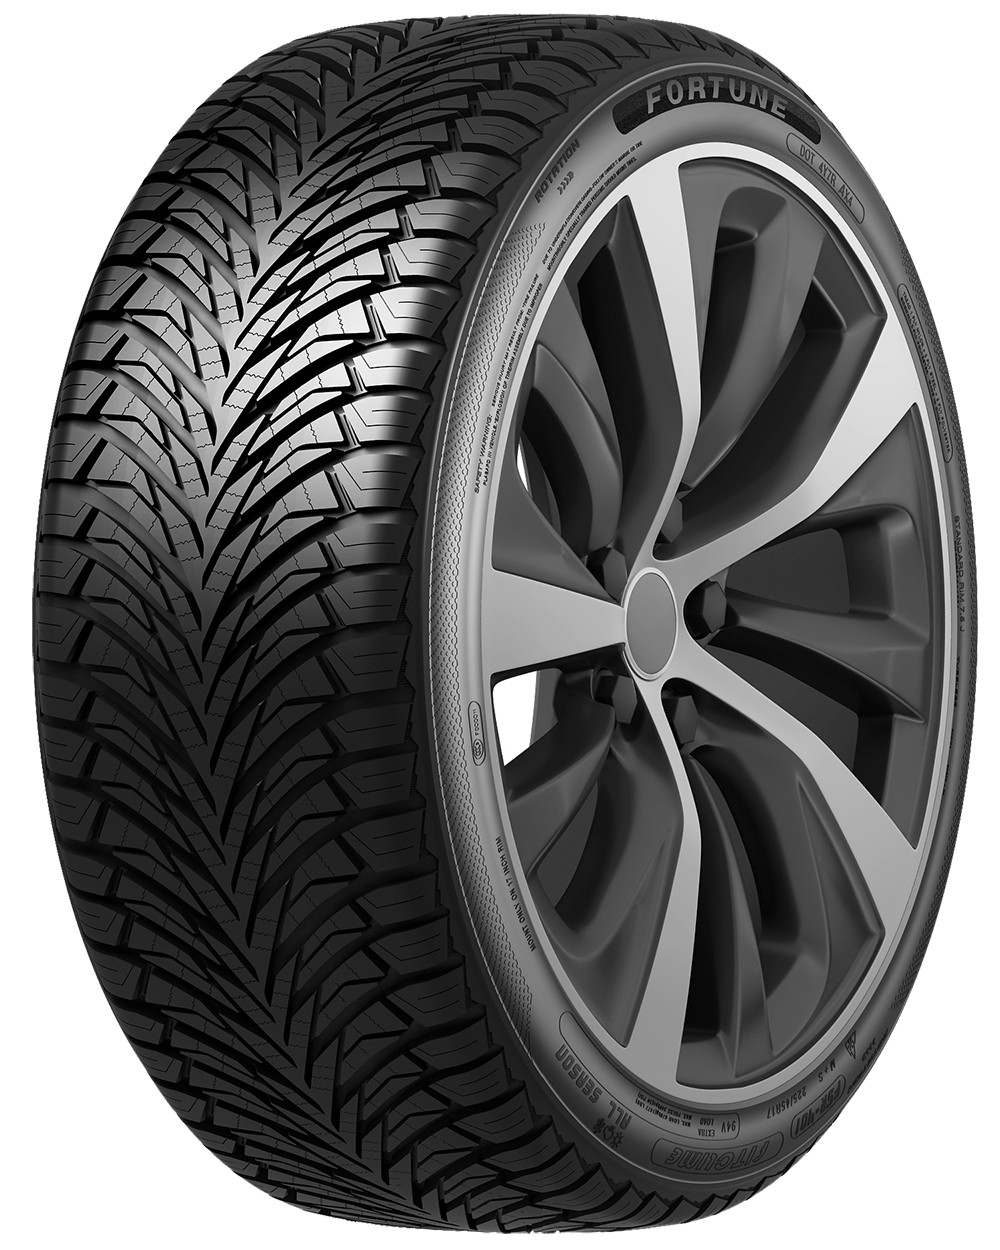 Thumb Fortune Gomme Nuove Fortune 175/65 R15 88H FITCLIME FSR-401 XL M+S pneumatici nuovi All Season 0